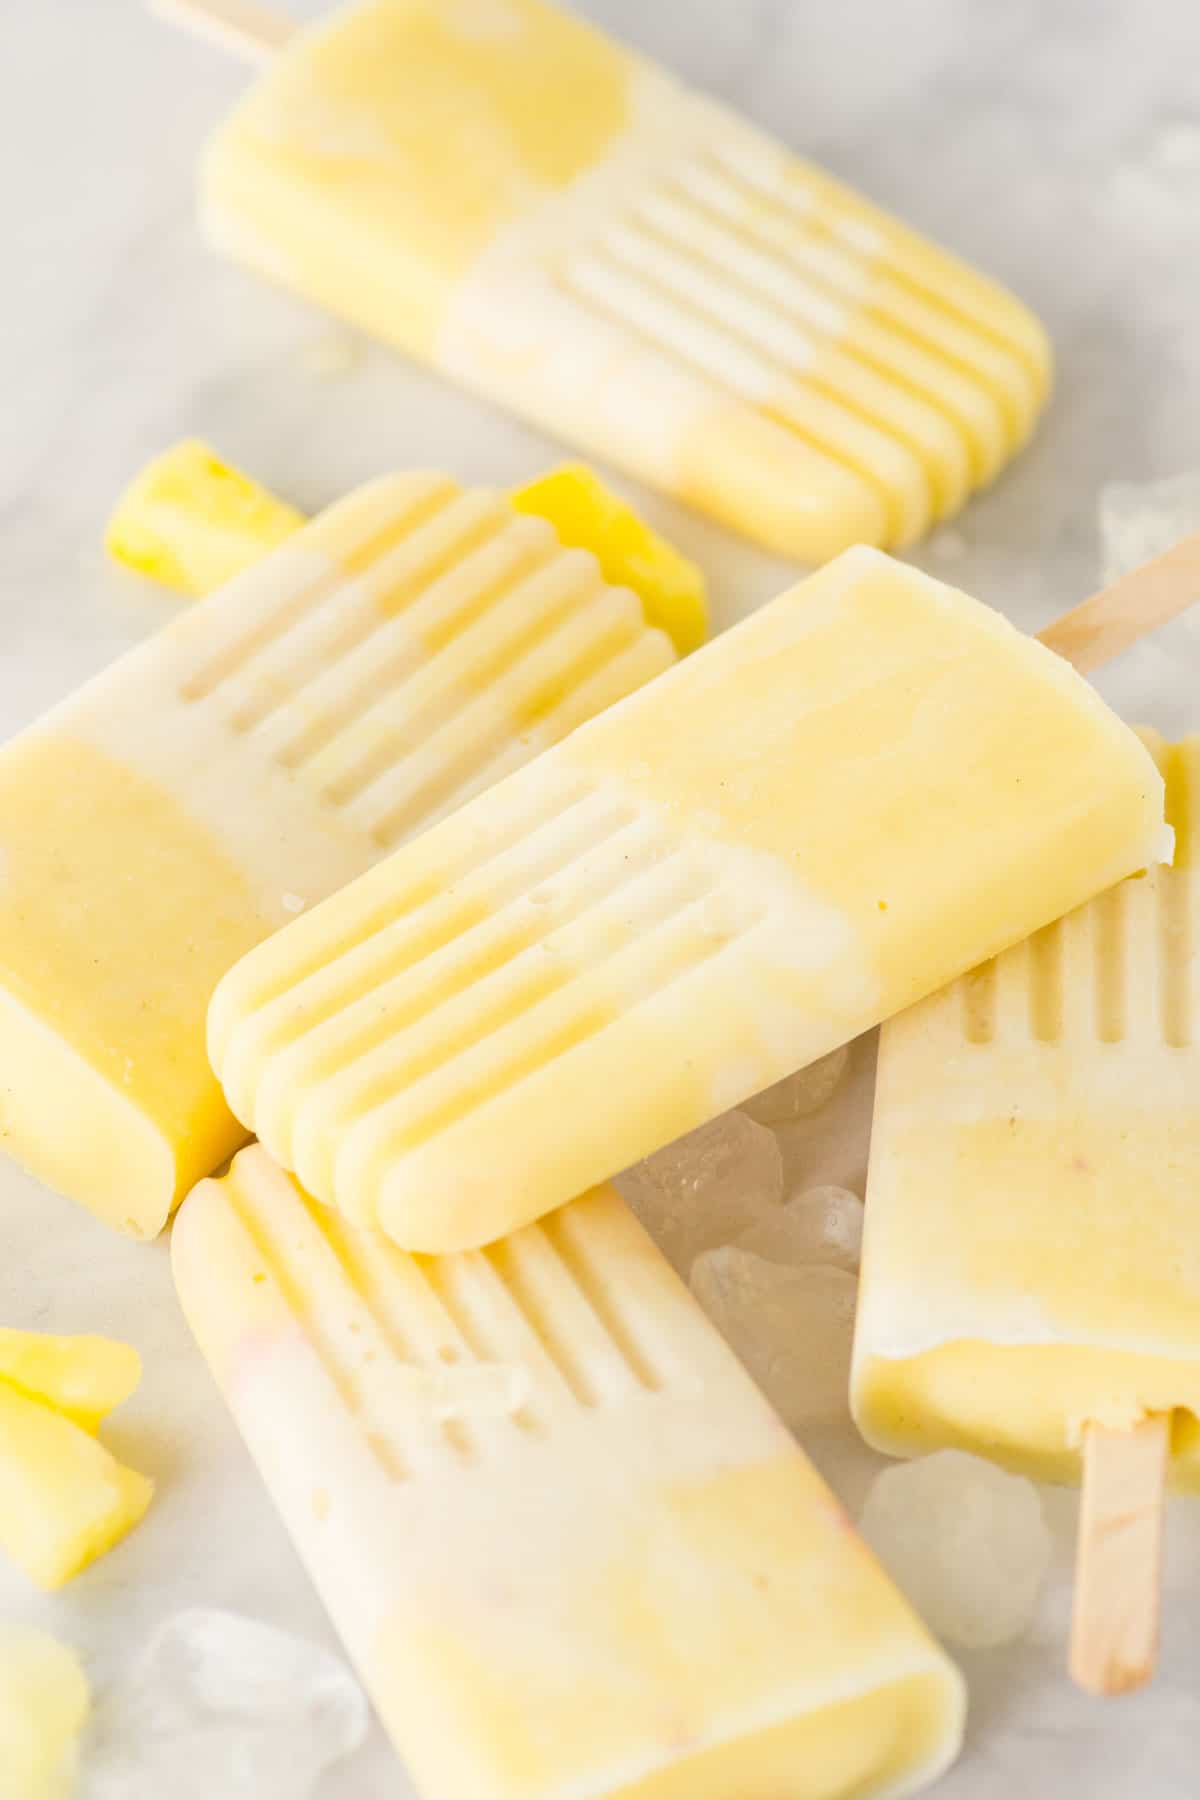 Yellow and white popsicles that are homemade using pineapple and cream. 